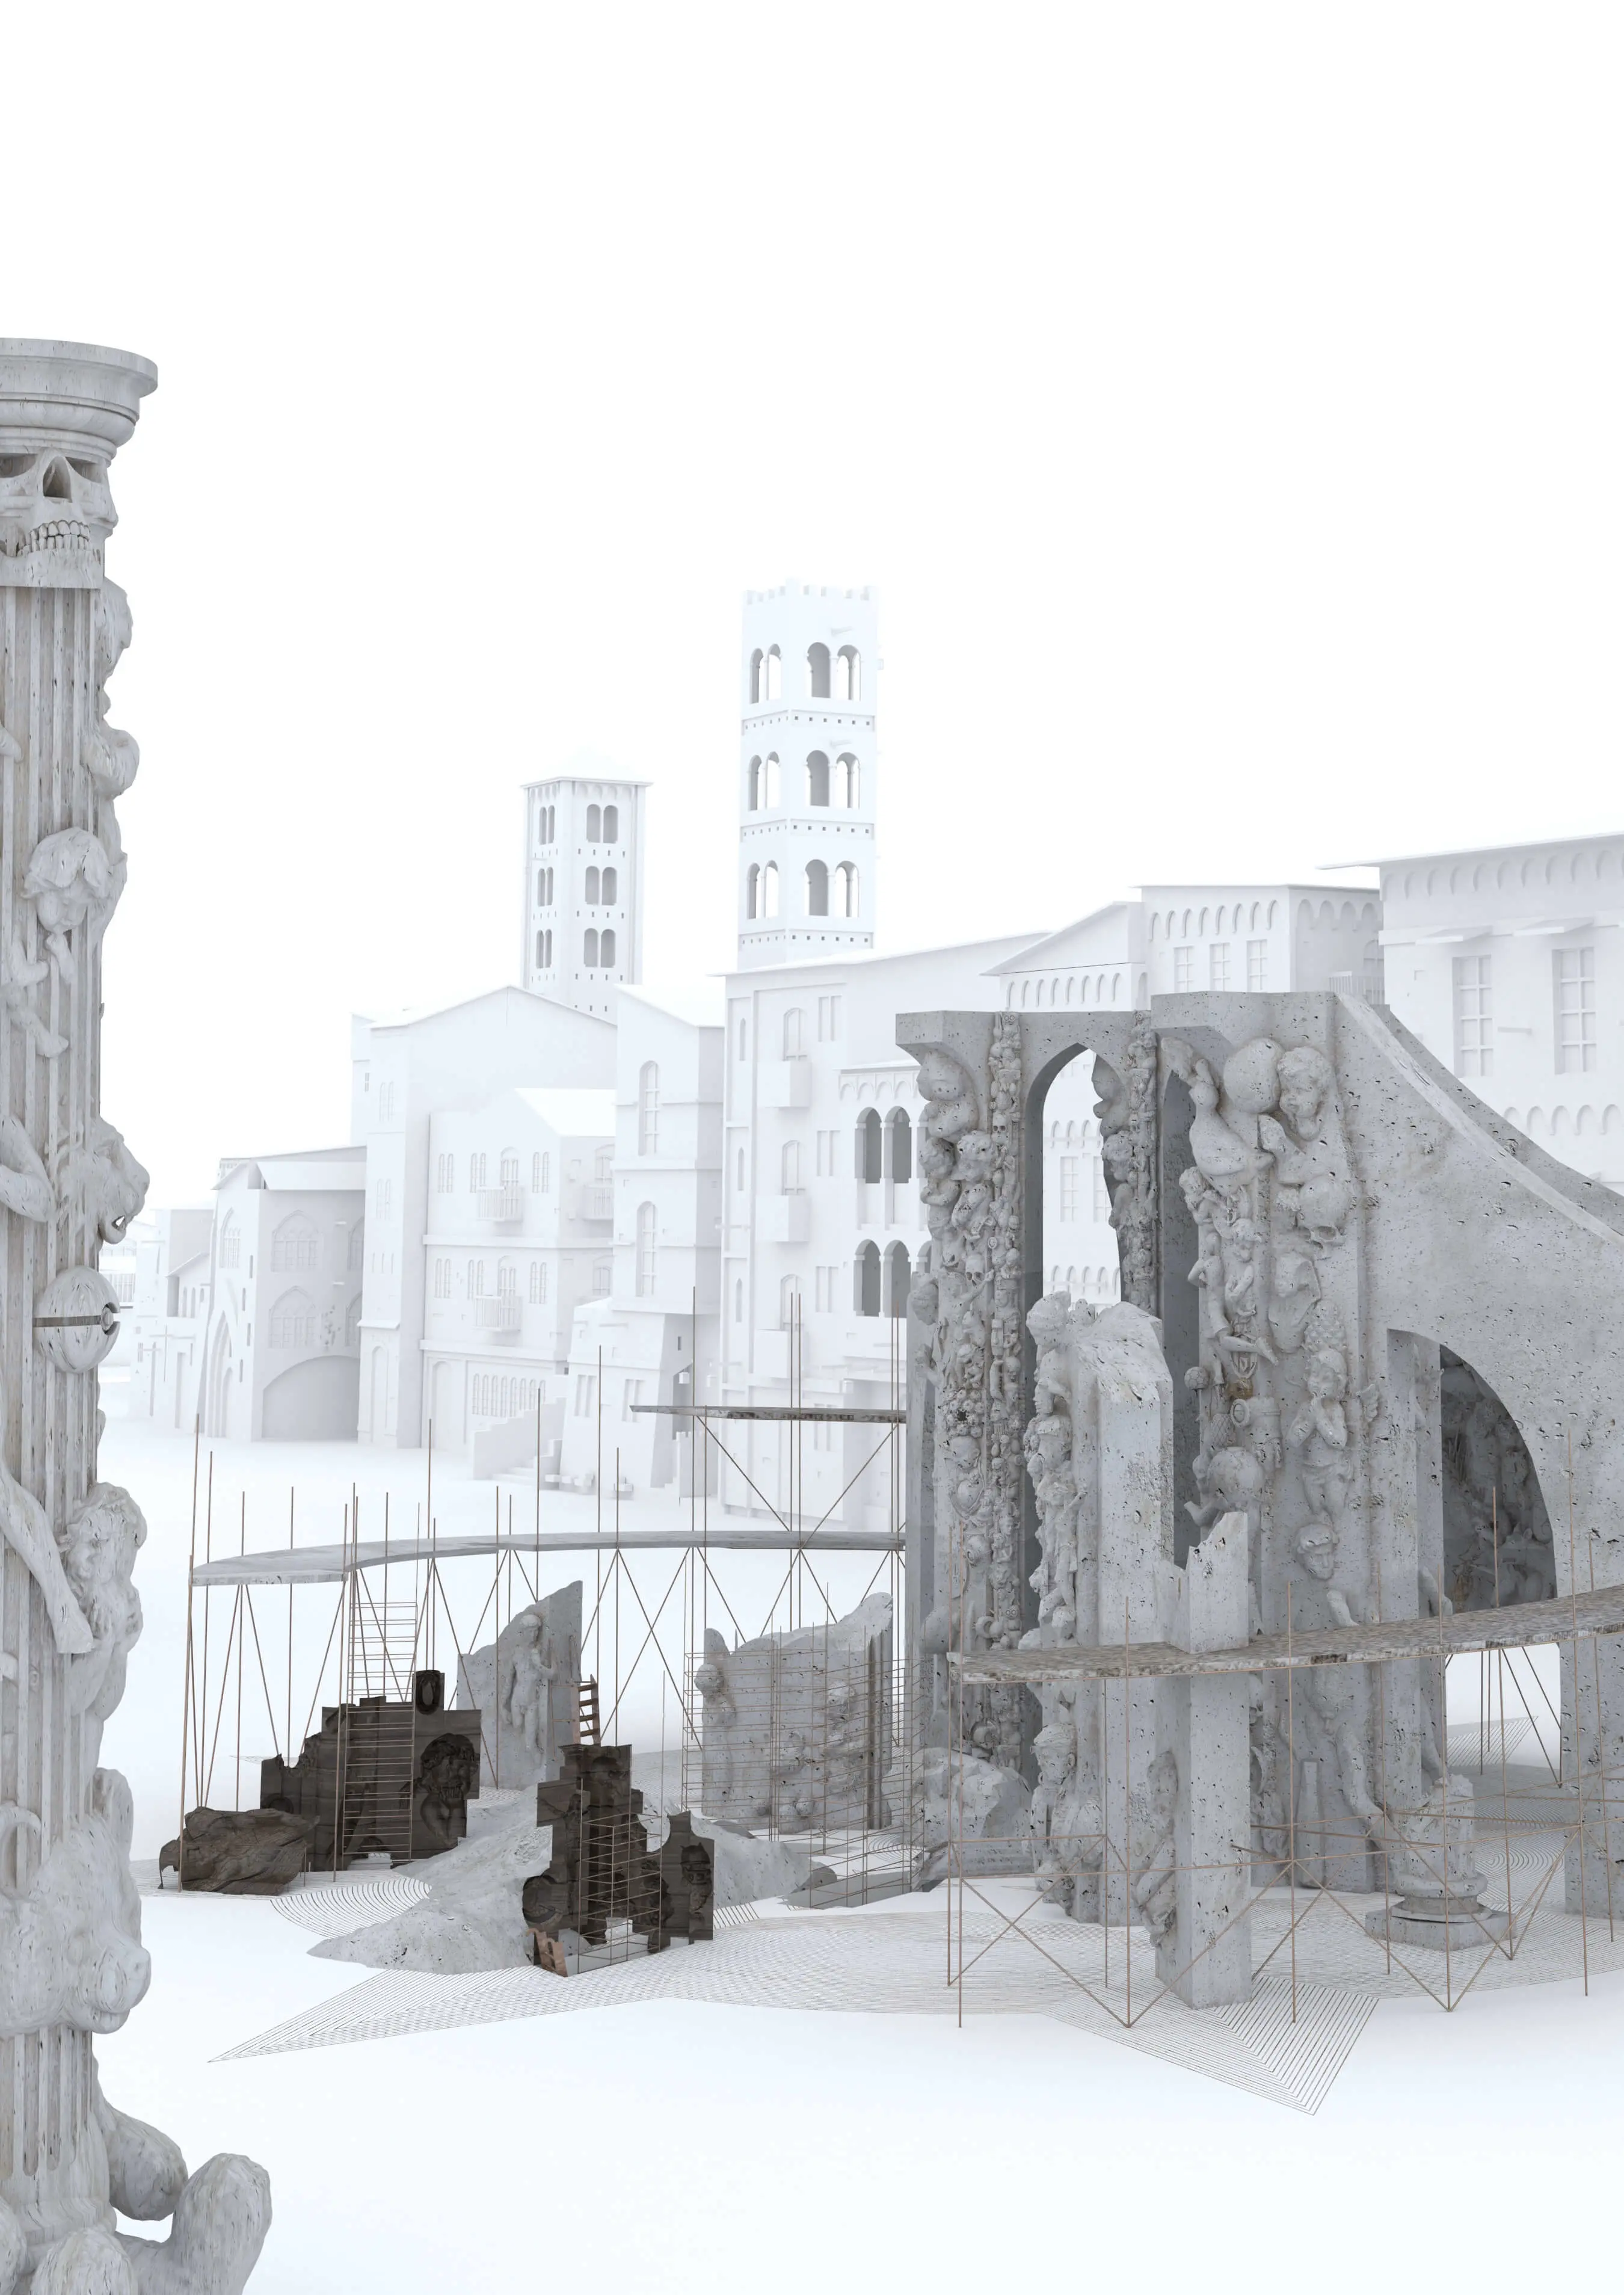 Skyhive architecture competition winners 2019- Ruins-Batching-1